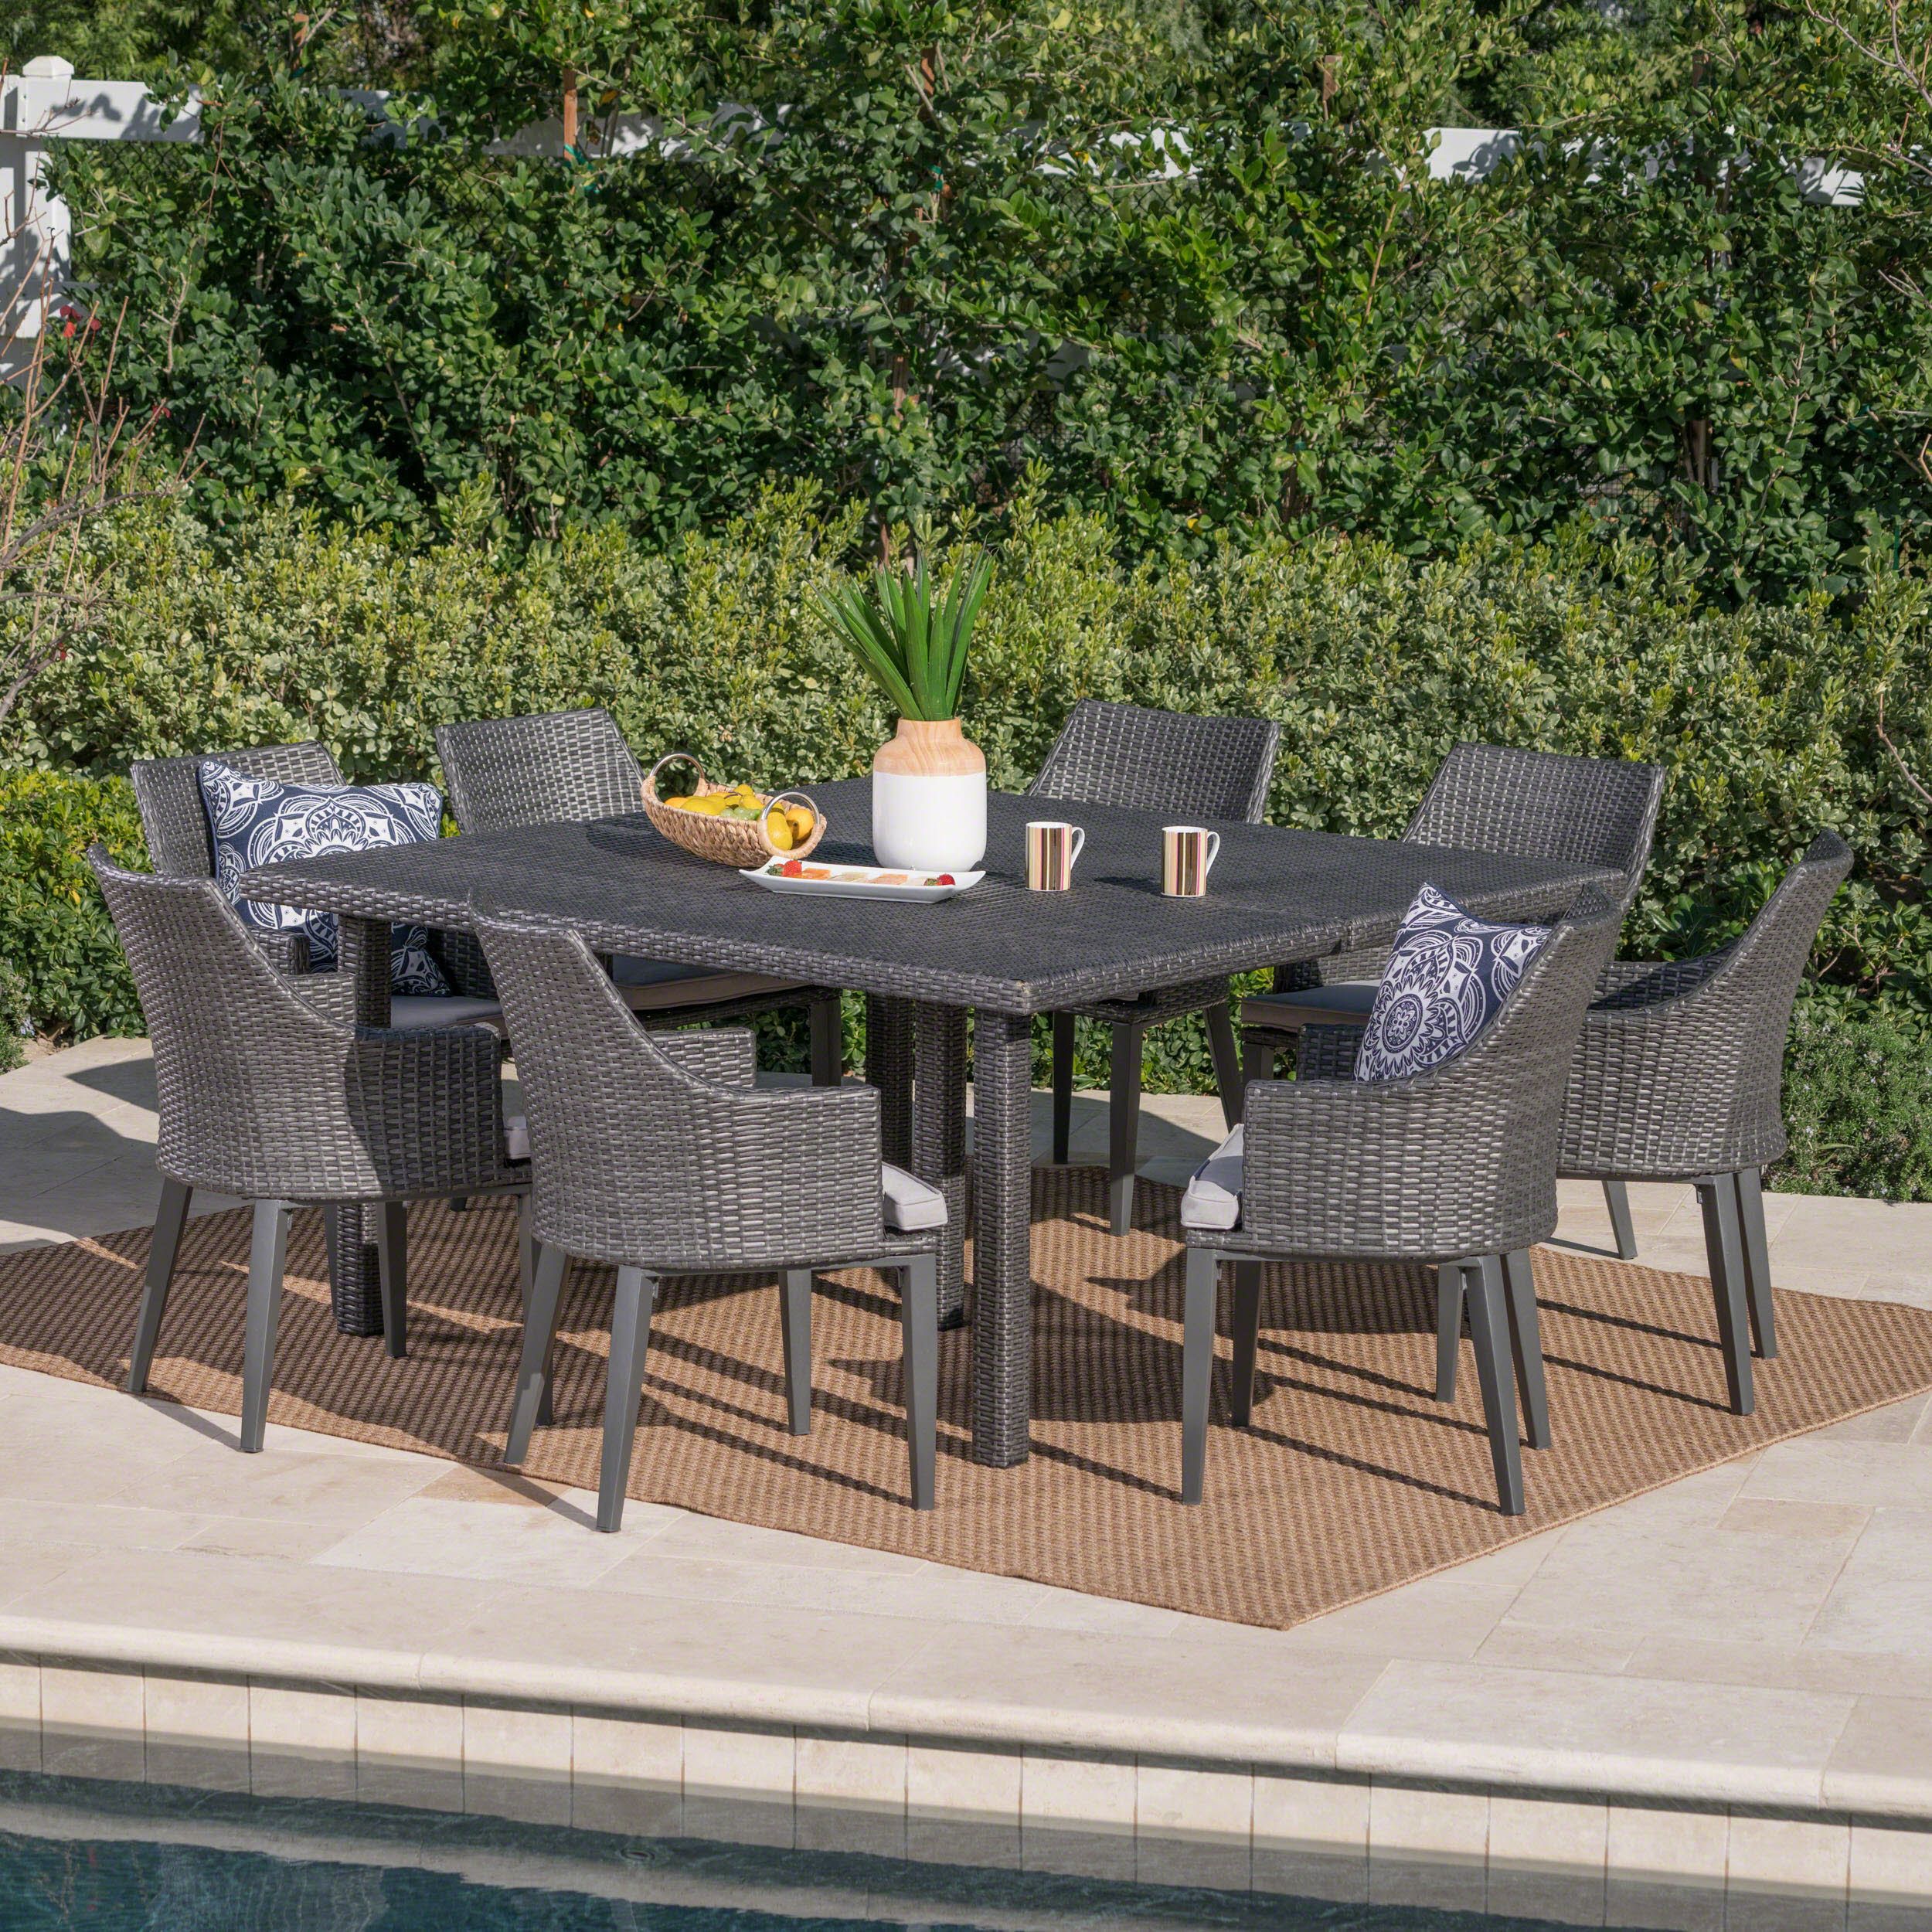 Christopher Knight Home Arnell Outdoor 9 Piece Square Wicker Dining Set Throughout 9 Piece Square Patio Dining Sets (View 2 of 15)